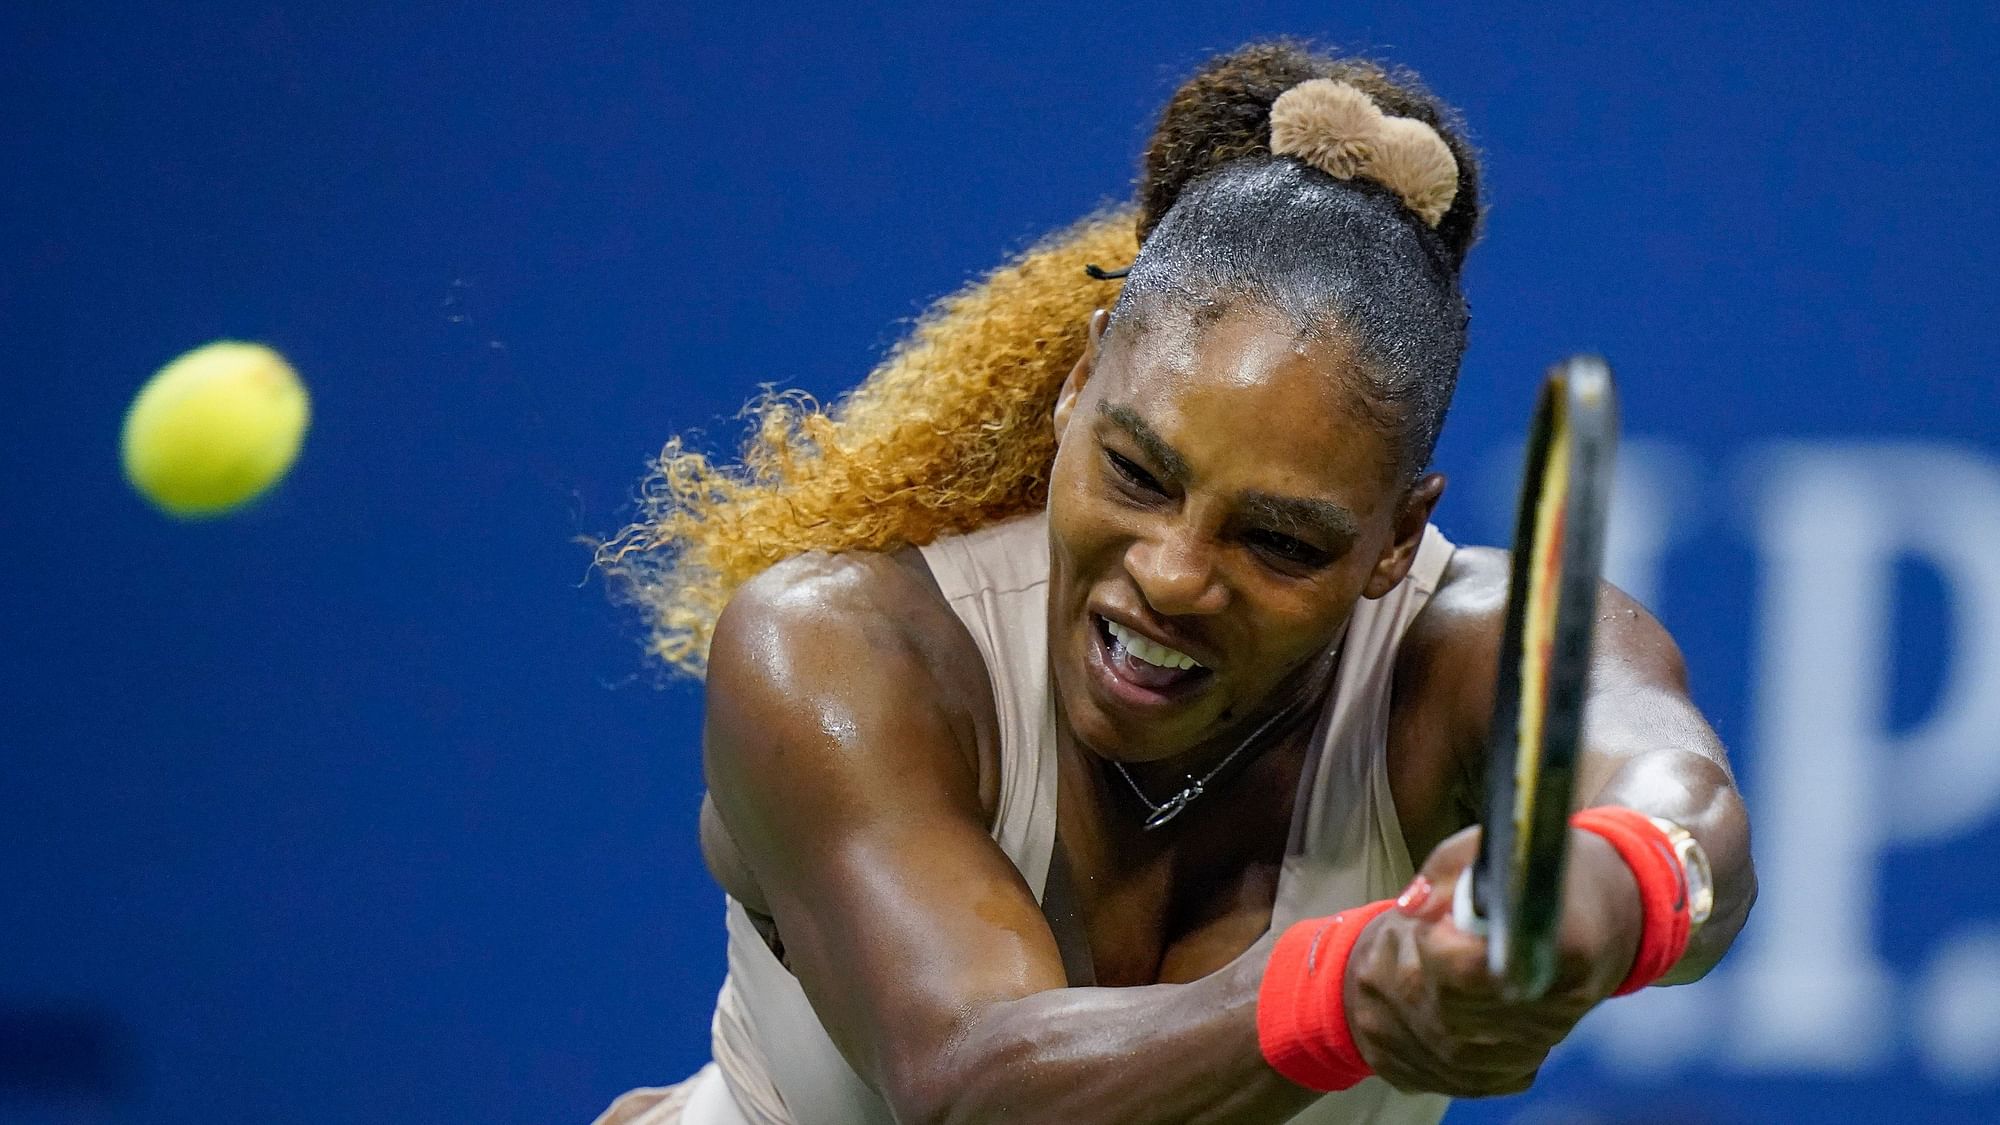 Former World No.1 Victoria Azarenka has knocked out Serena Williams from the 2020 US Open.